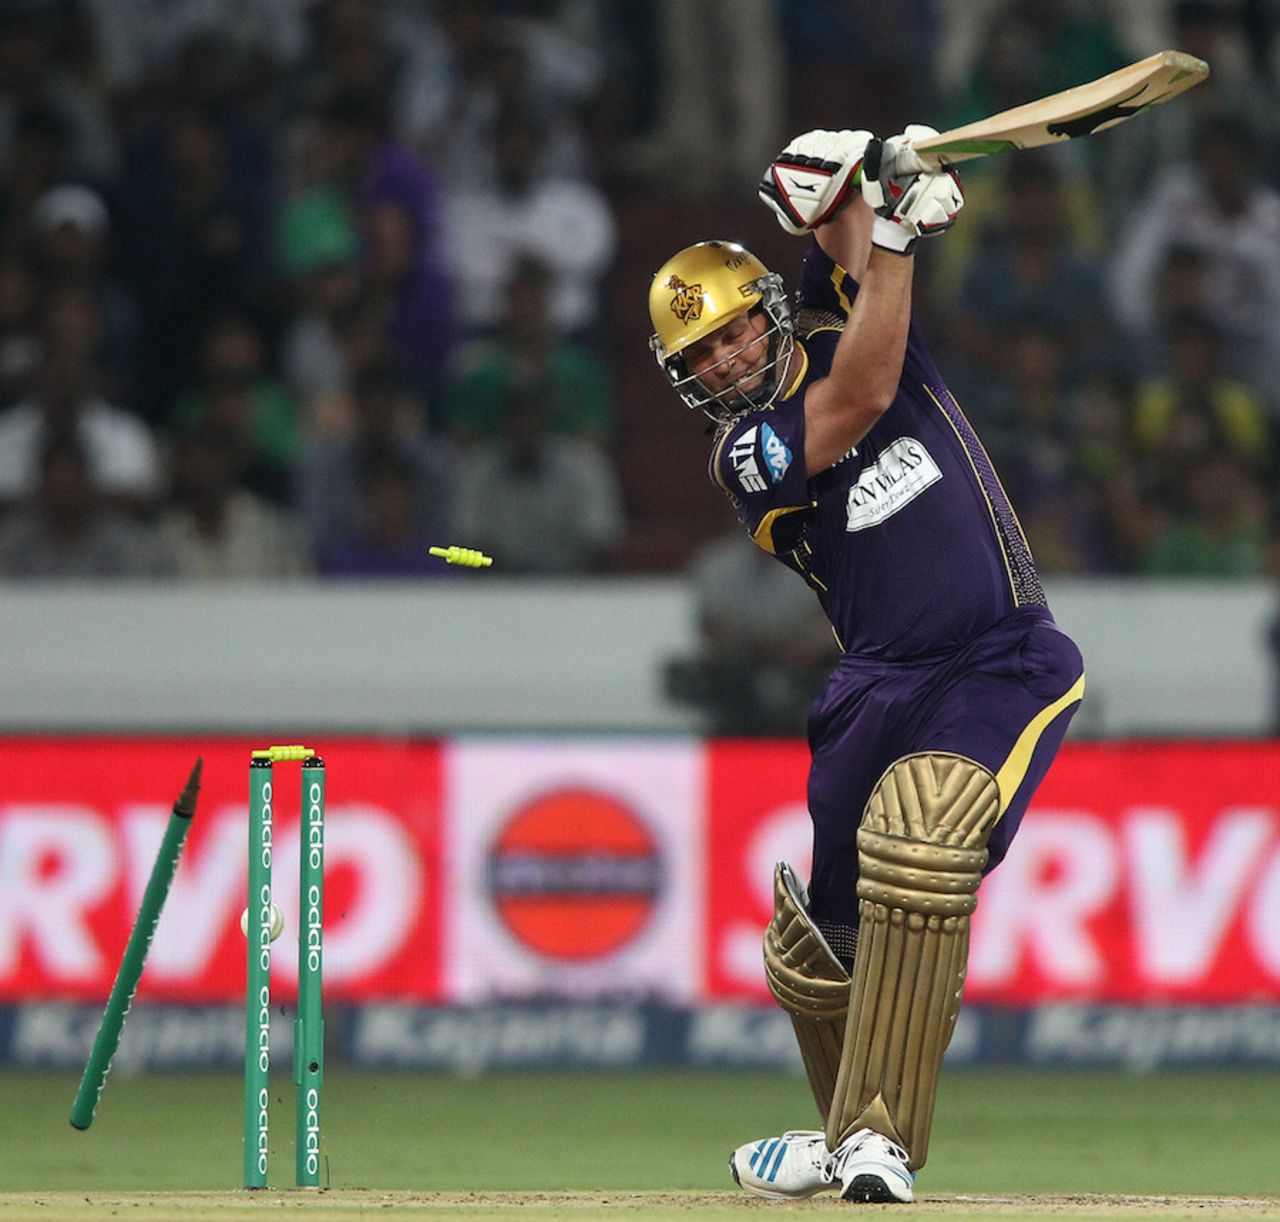 Jacques Kallis misses a quick delivery from Craig Alexander, Dolphins v Kolkata Knight Riders, Champions League T20, Group A, Hyderabad, September 29, 2014